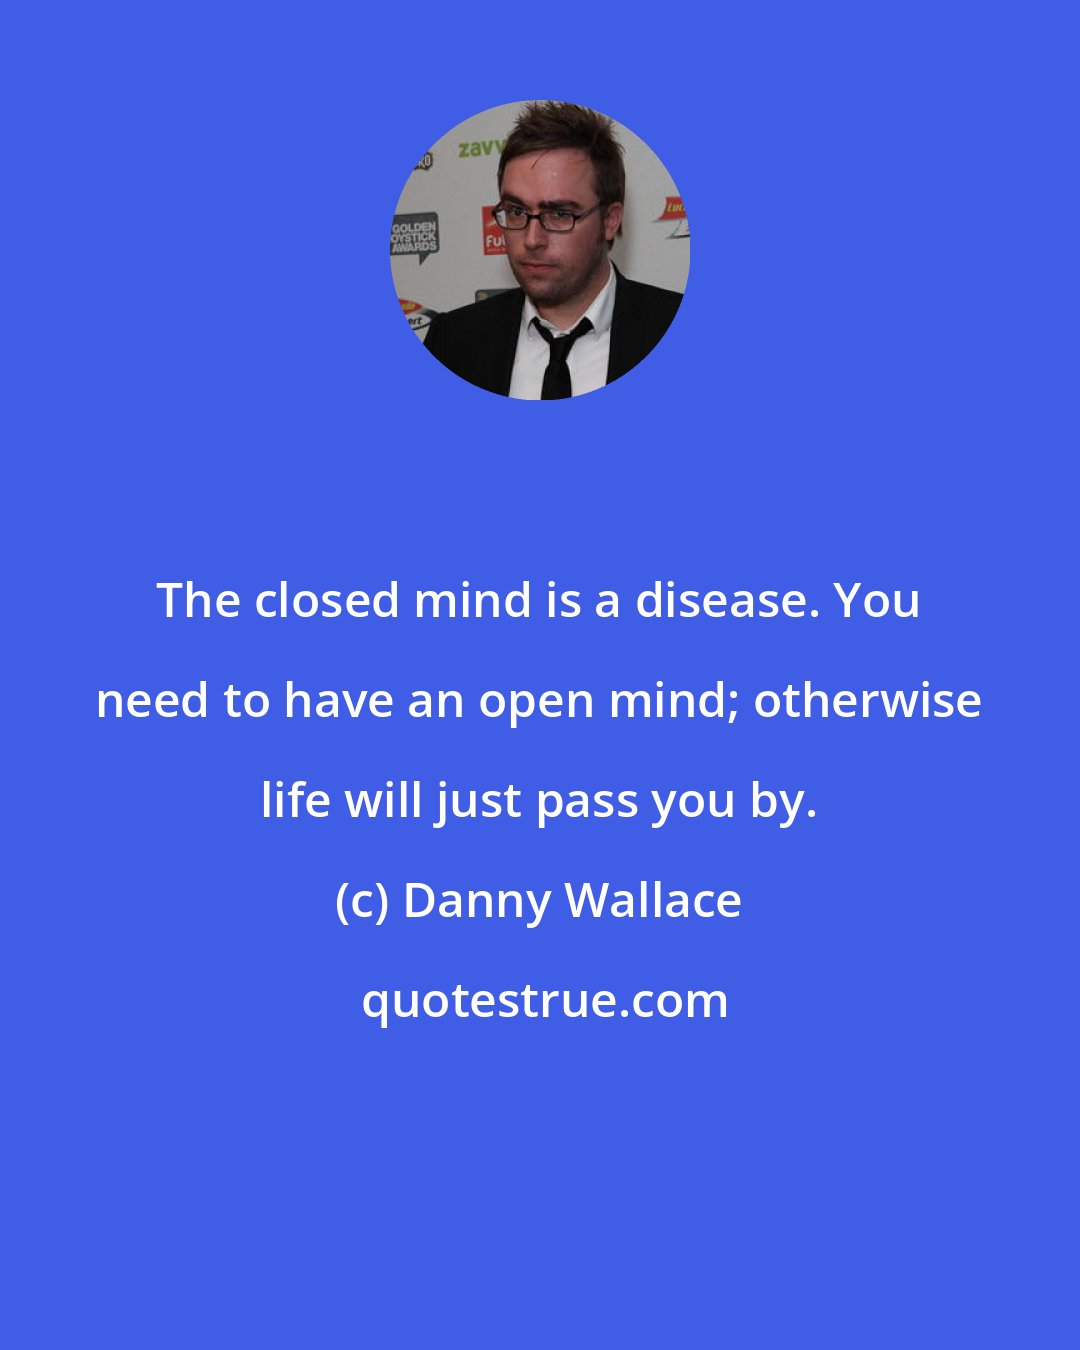 Danny Wallace: The closed mind is a disease. You need to have an open mind; otherwise life will just pass you by.